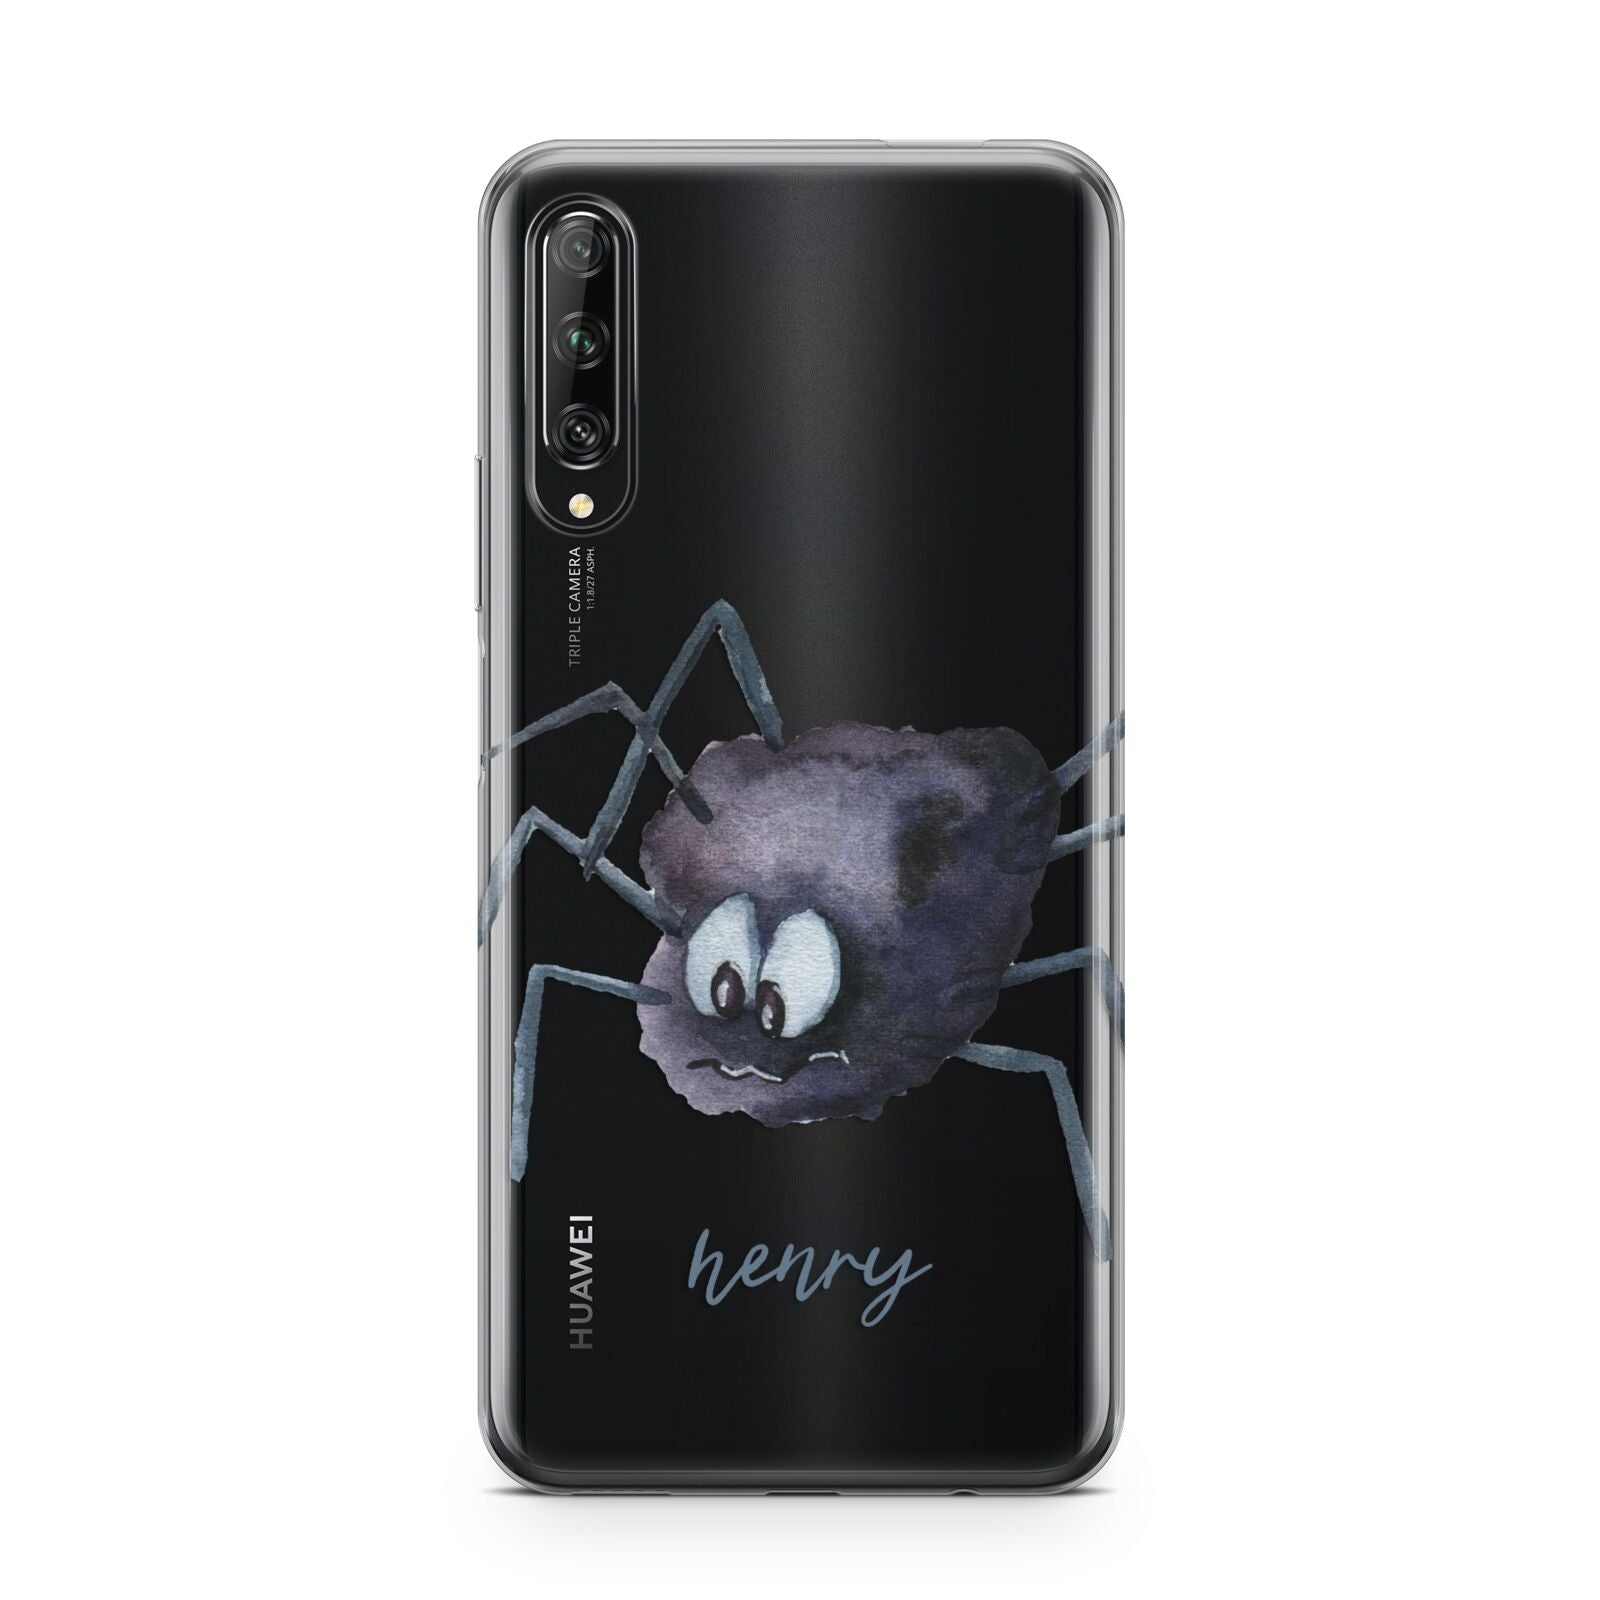 Scared Spider Personalised Huawei P Smart Pro 2019